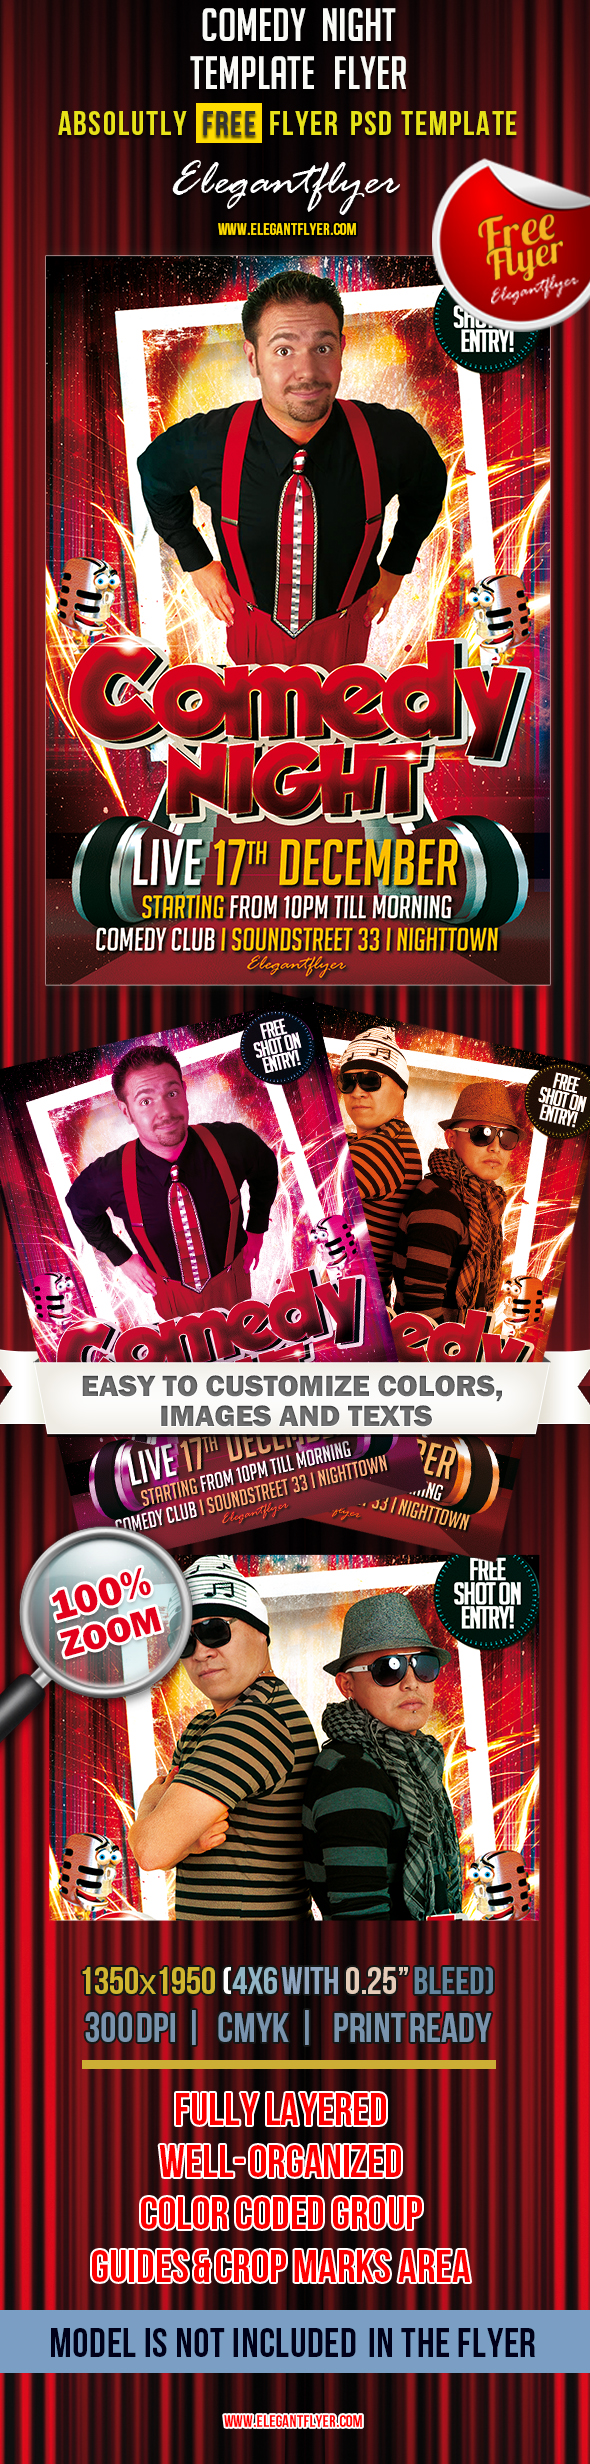 Comedy Night Flyer Template Free